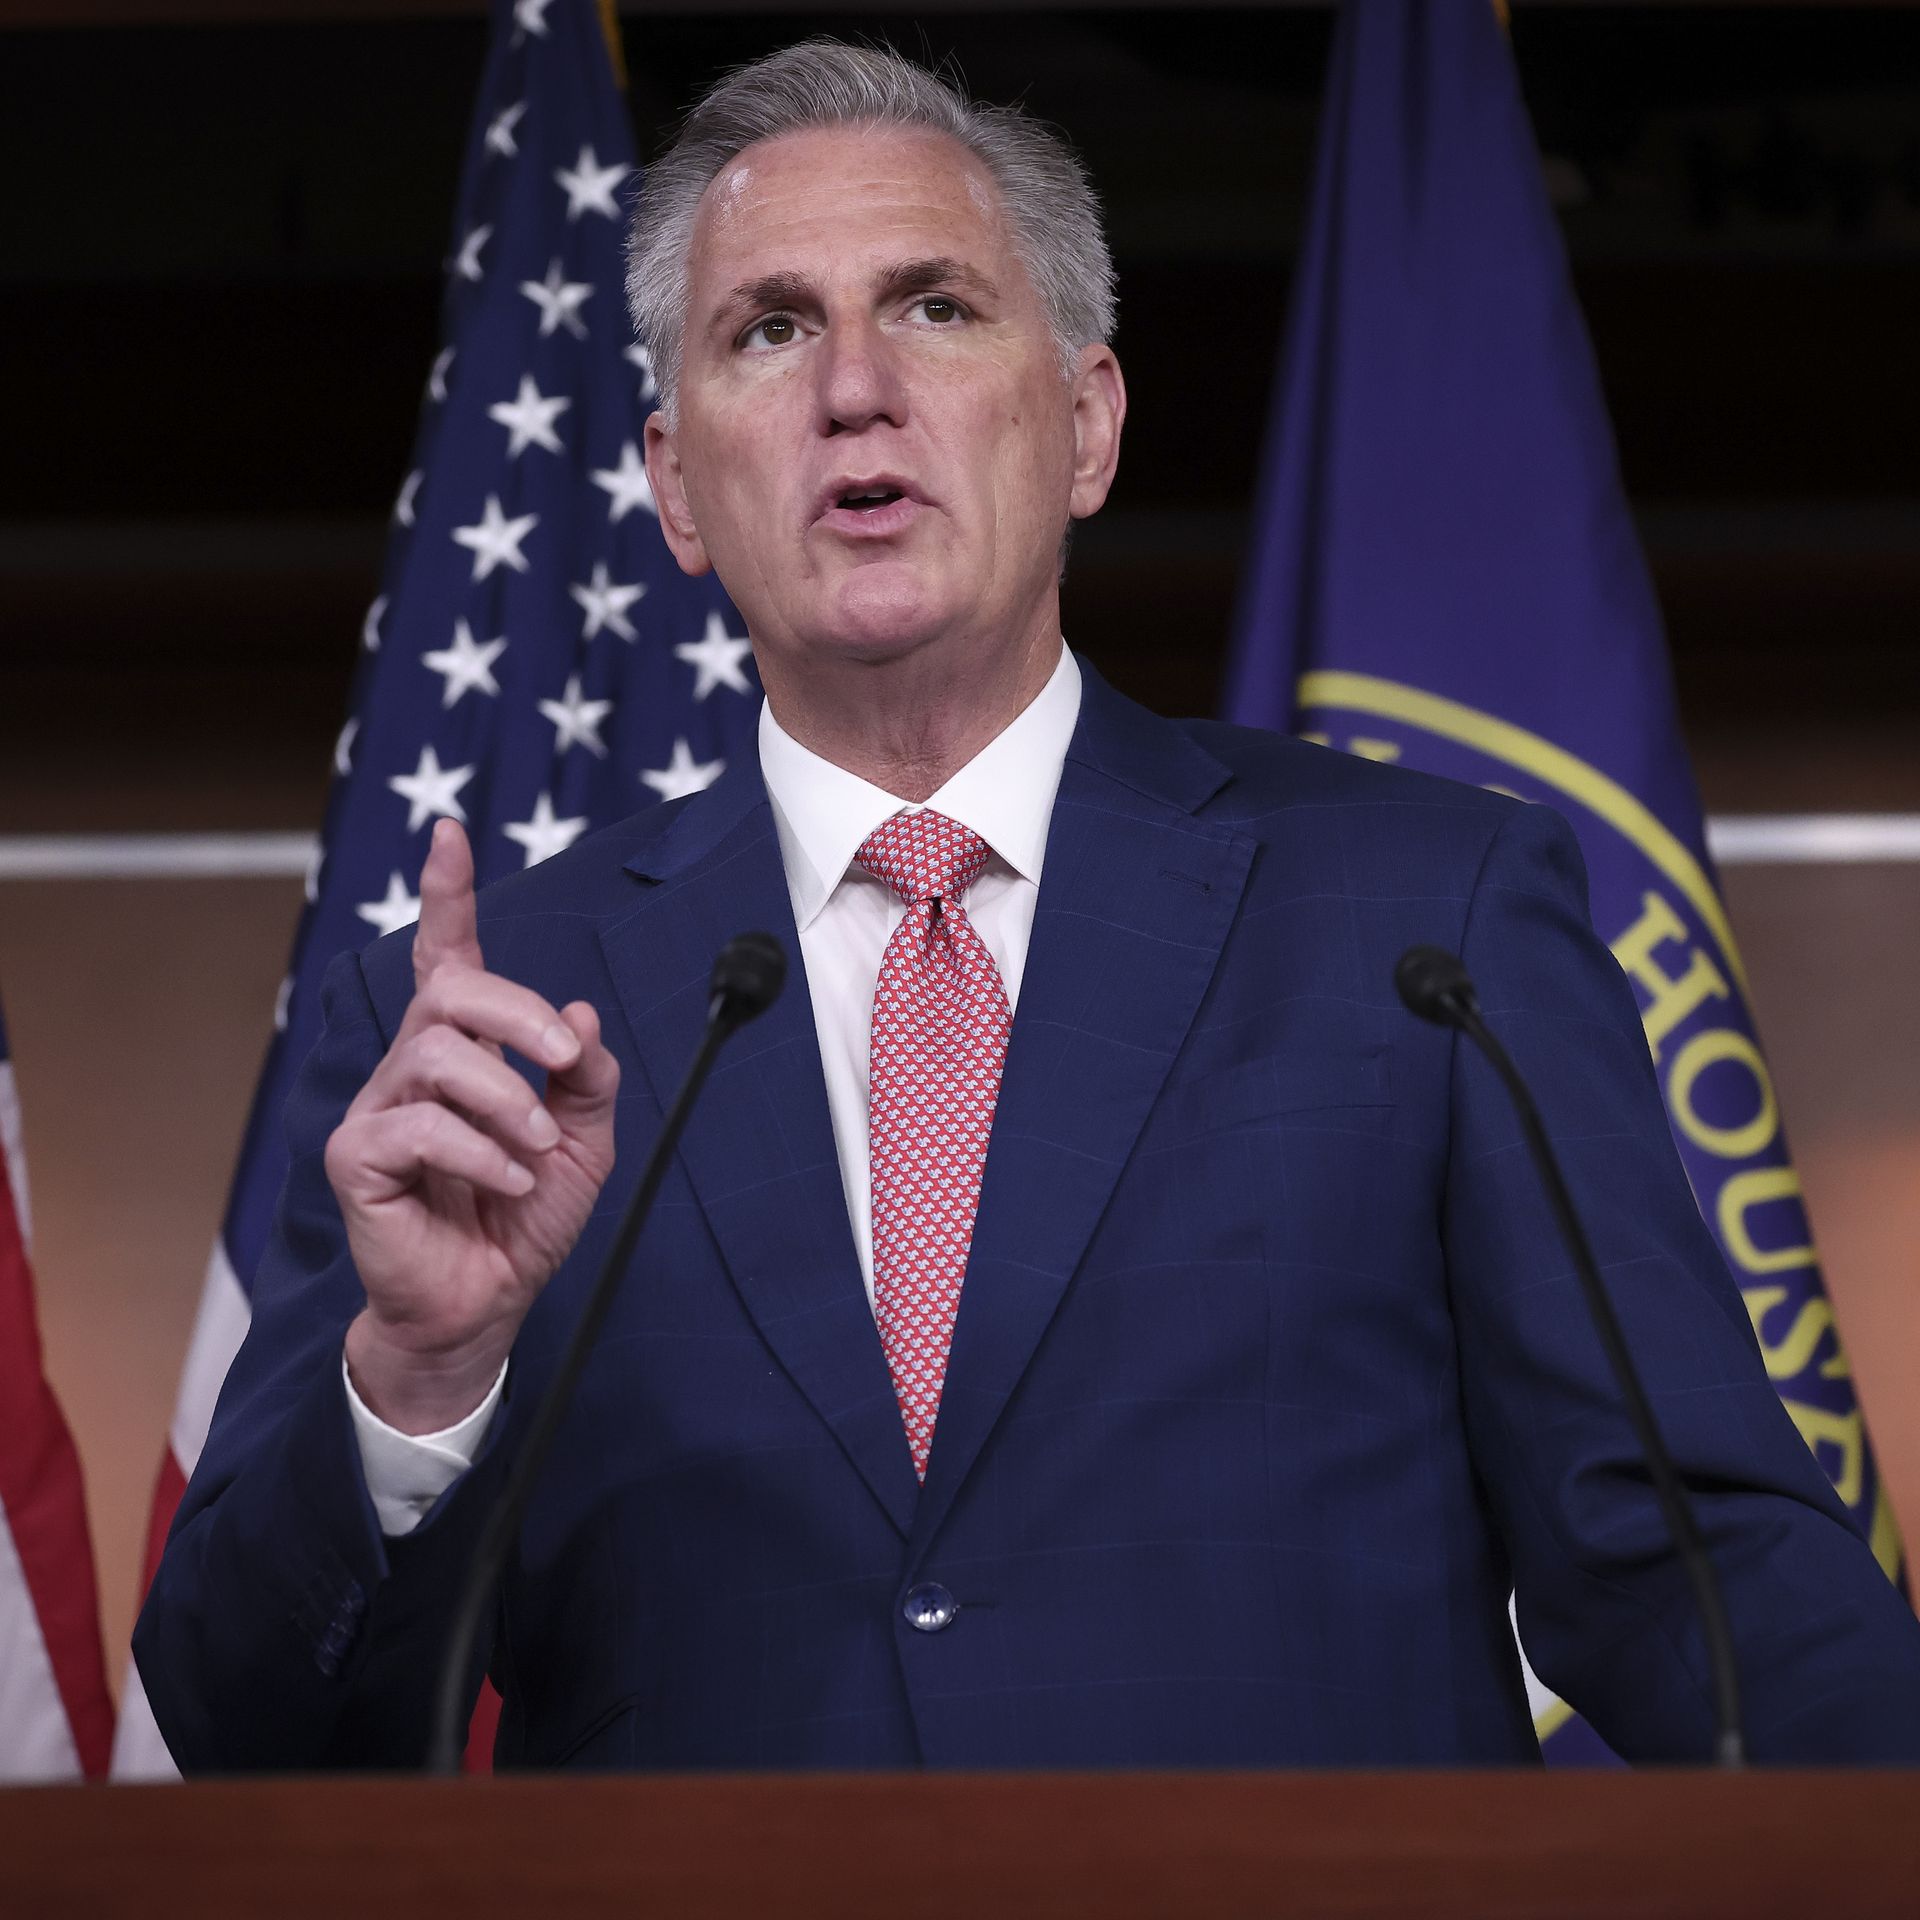 If not McCarthy then who? Other possible candidates for U.S. House